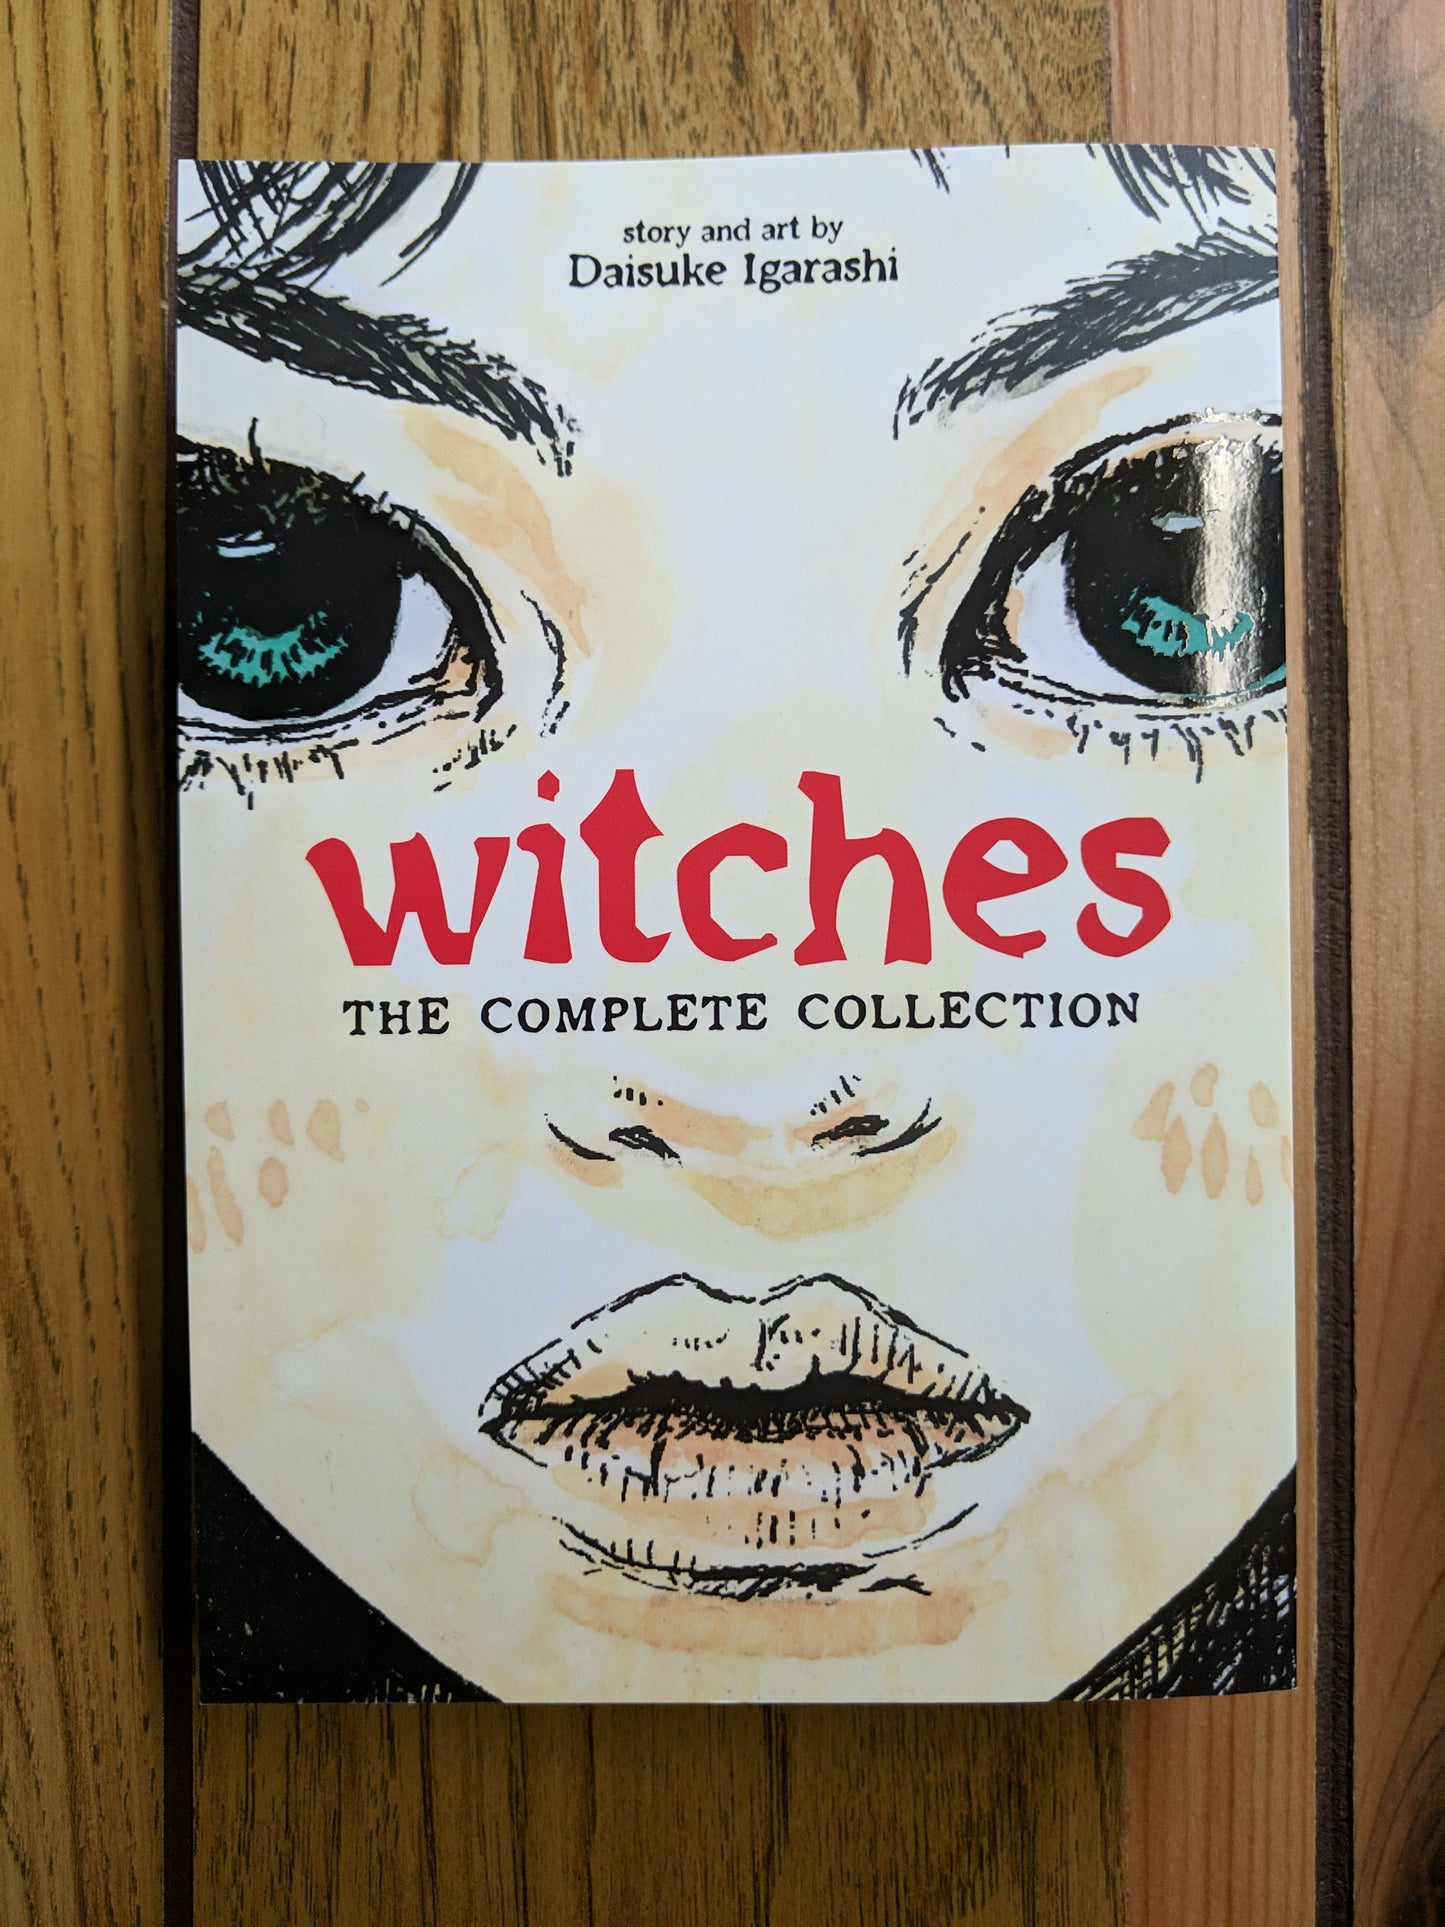 Witches: The Complete Collection